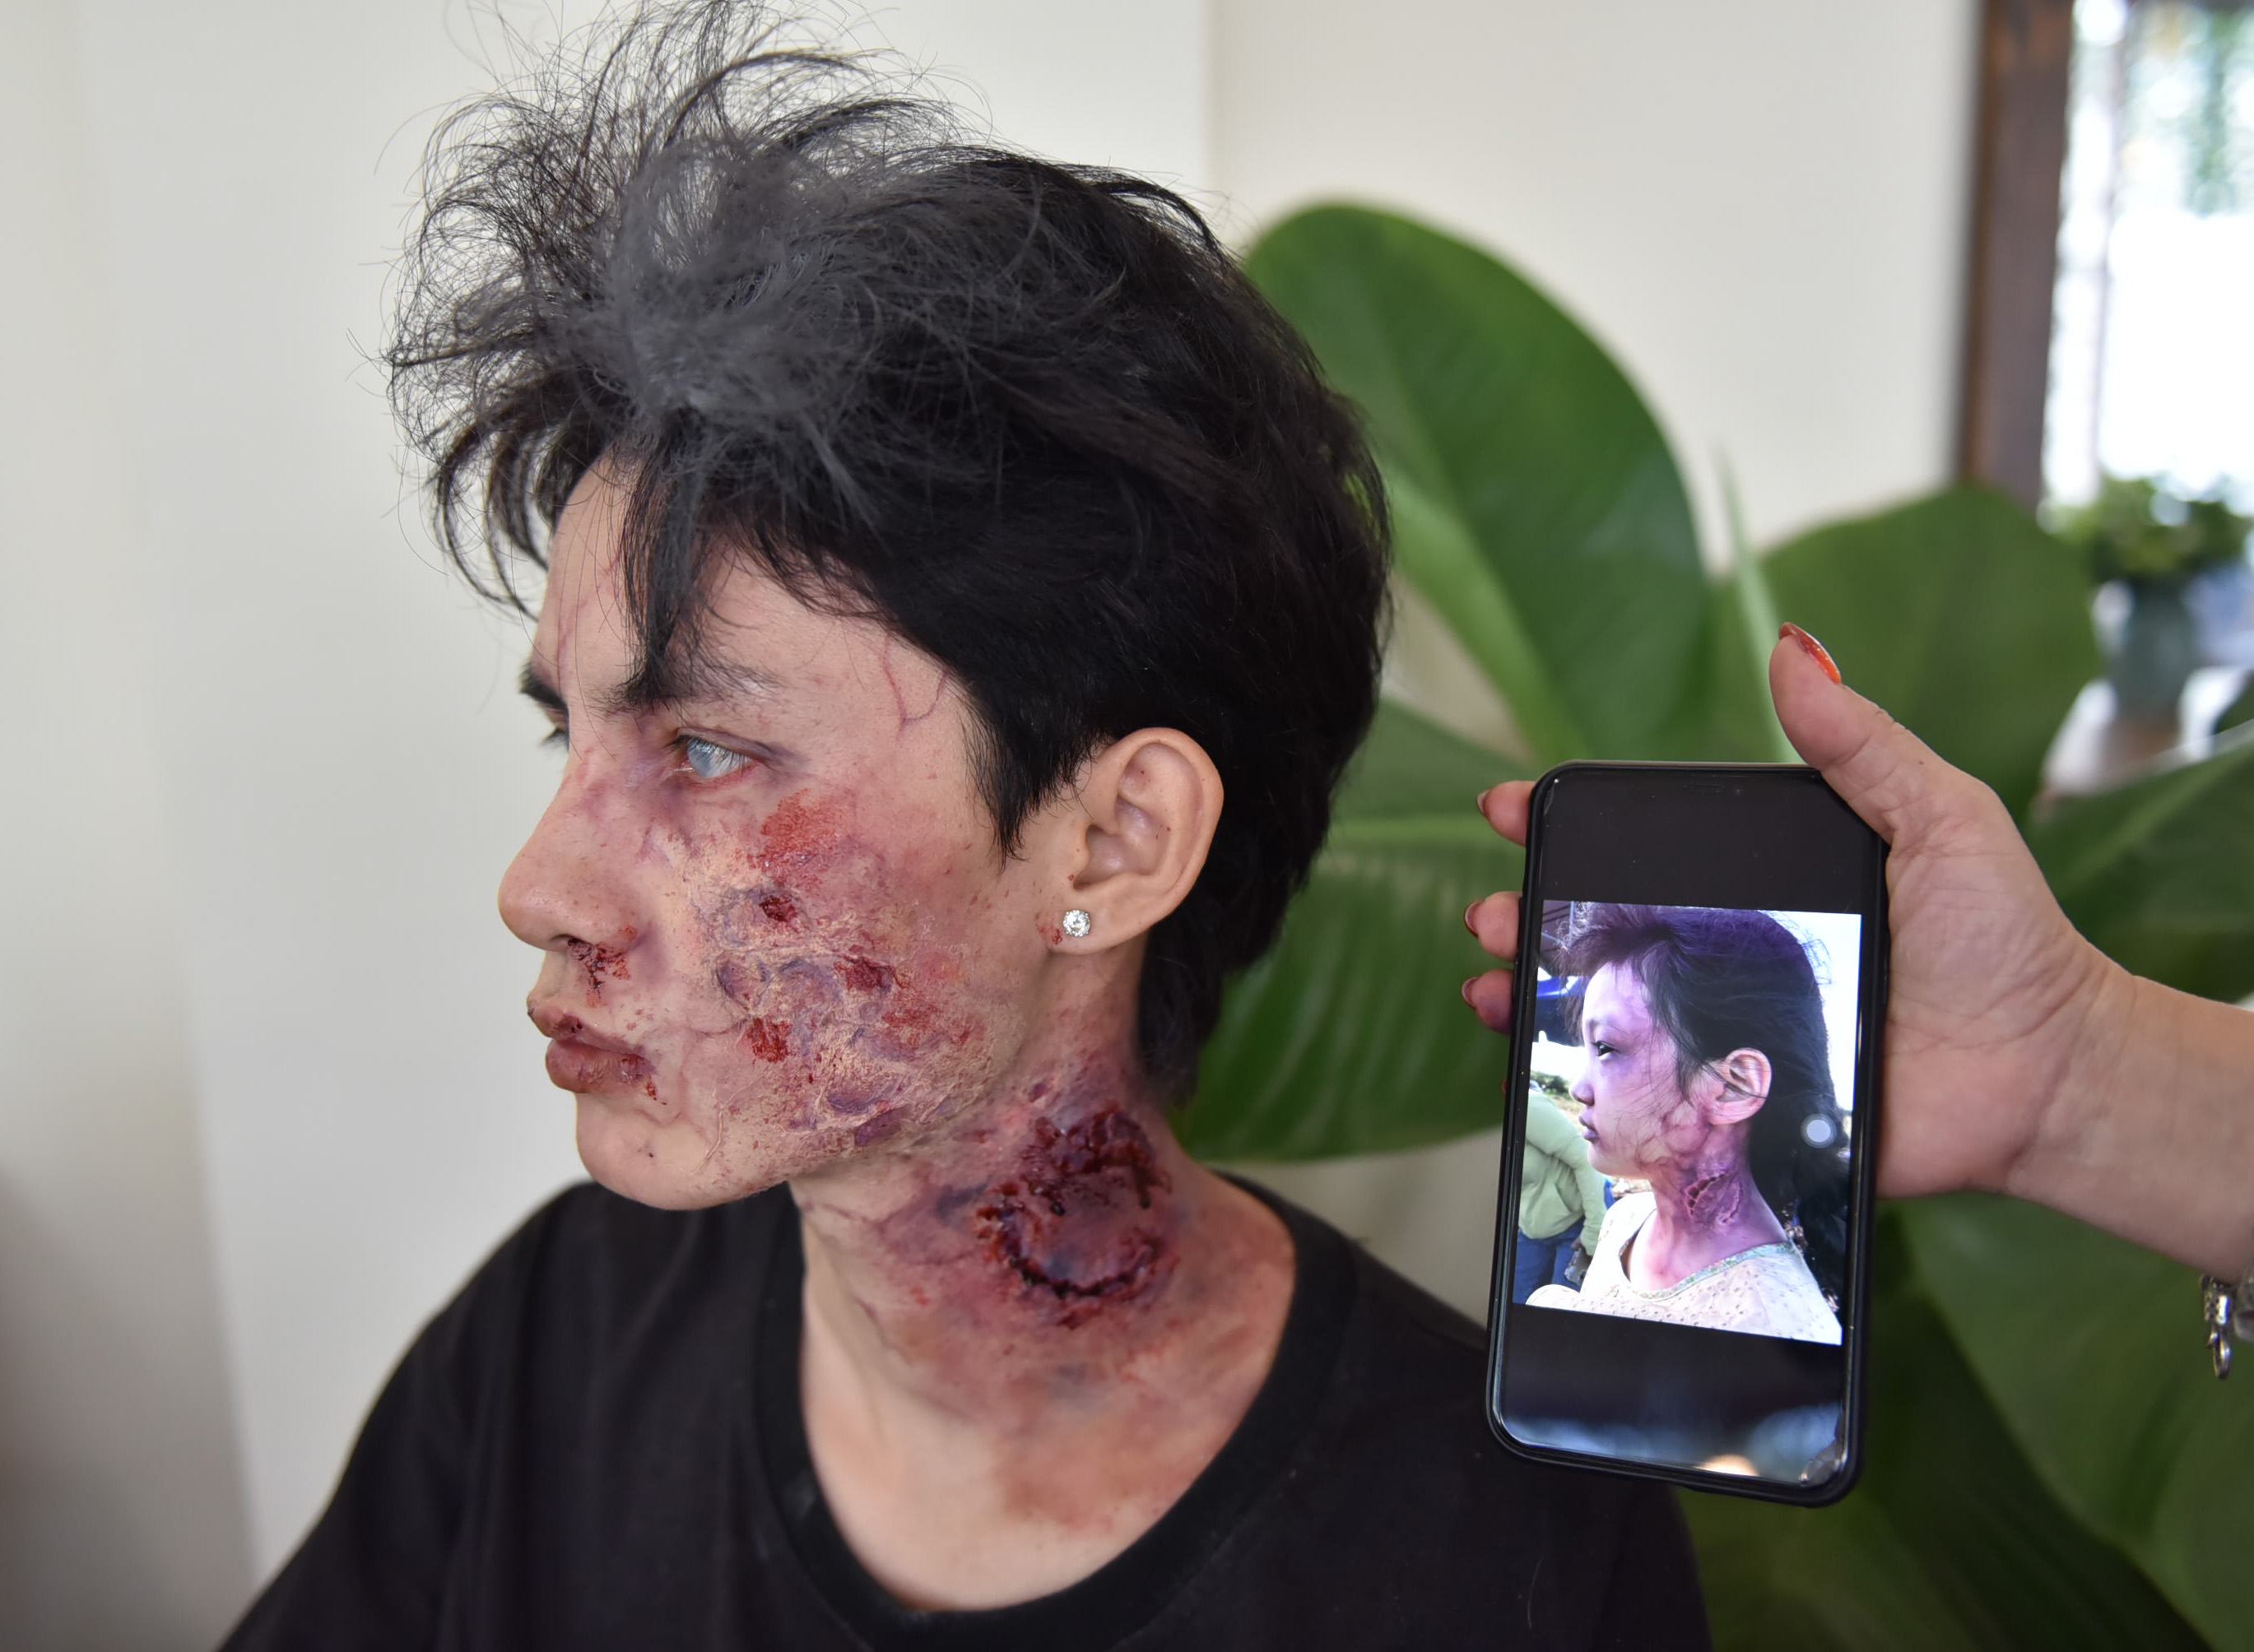 A finished zombie transformed by Hang in about 45 minutes. Photo: Ngoc Phuong / Tuoi Tre News